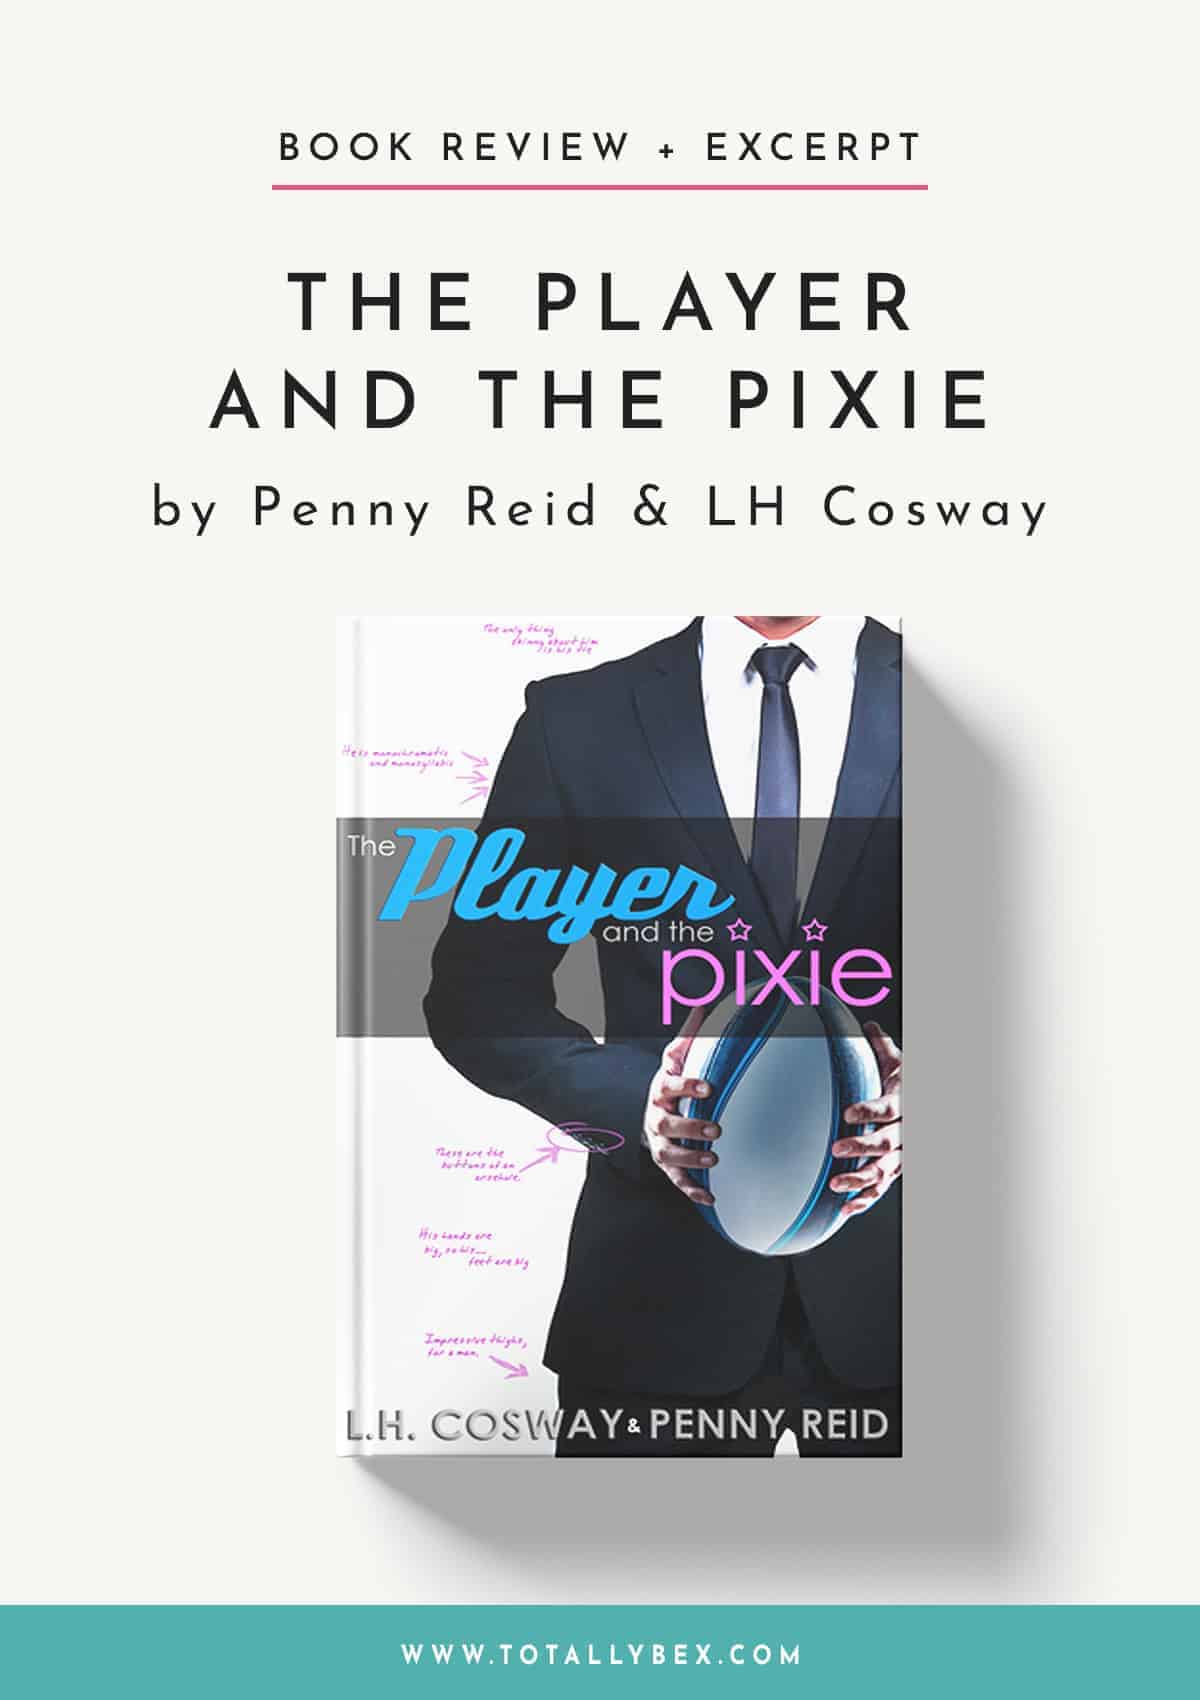 The Player and the Pixie by Penny Reid and LH Cosway-BookReview+Excerpt